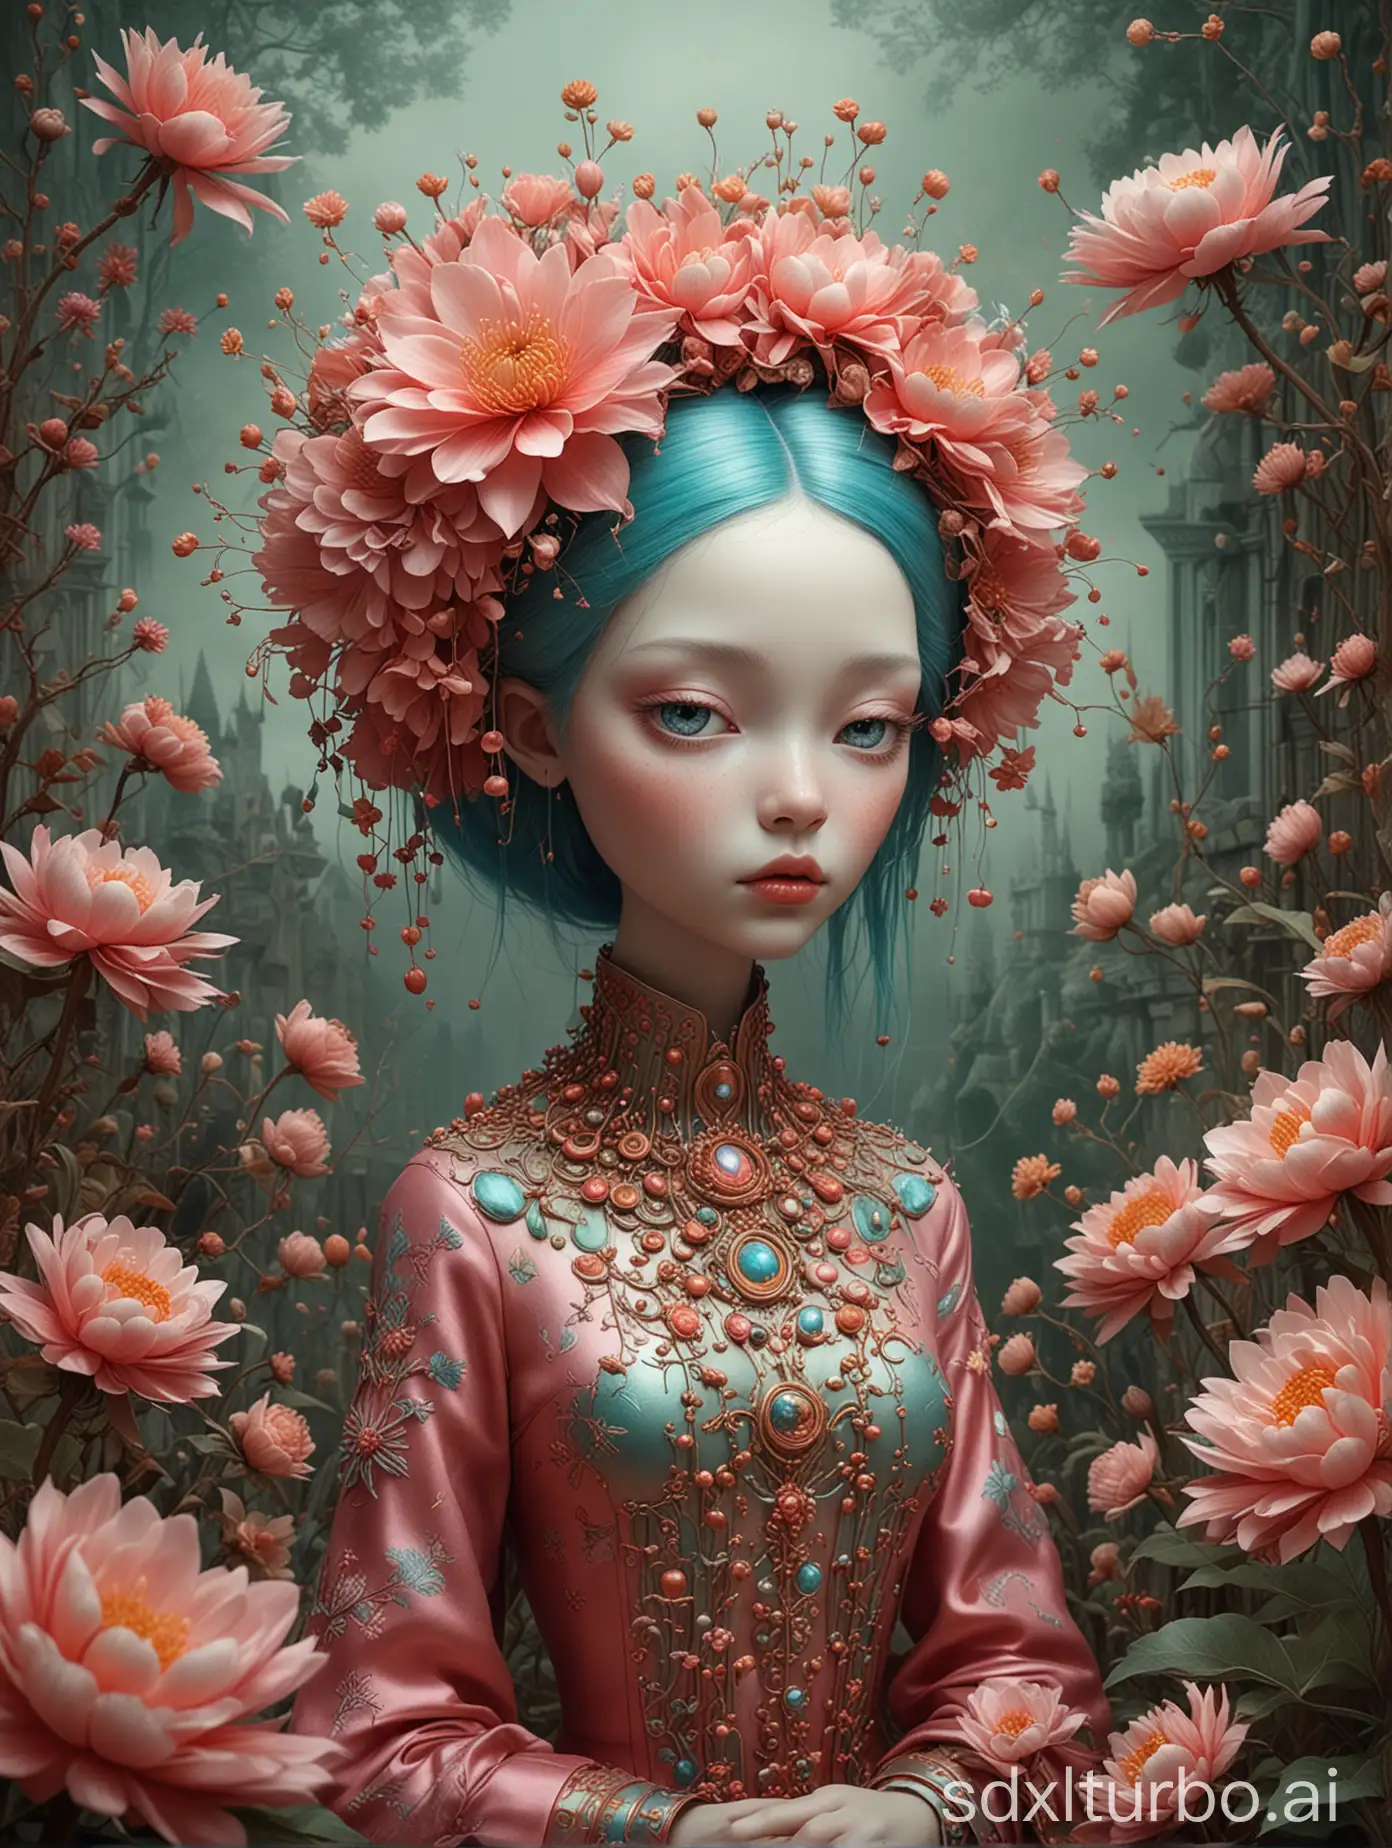 Mesmerizing blossom, acid druid metallic elements blending, styles of Nicoletta Ceccoli and Alberto Varanda, vibrant colors, intricate details, visual feast, captivated by unique artistic styles, beauty and wonder, surreal landscape, digital painting, ultra fine, vivid colors, dramatic lighting.